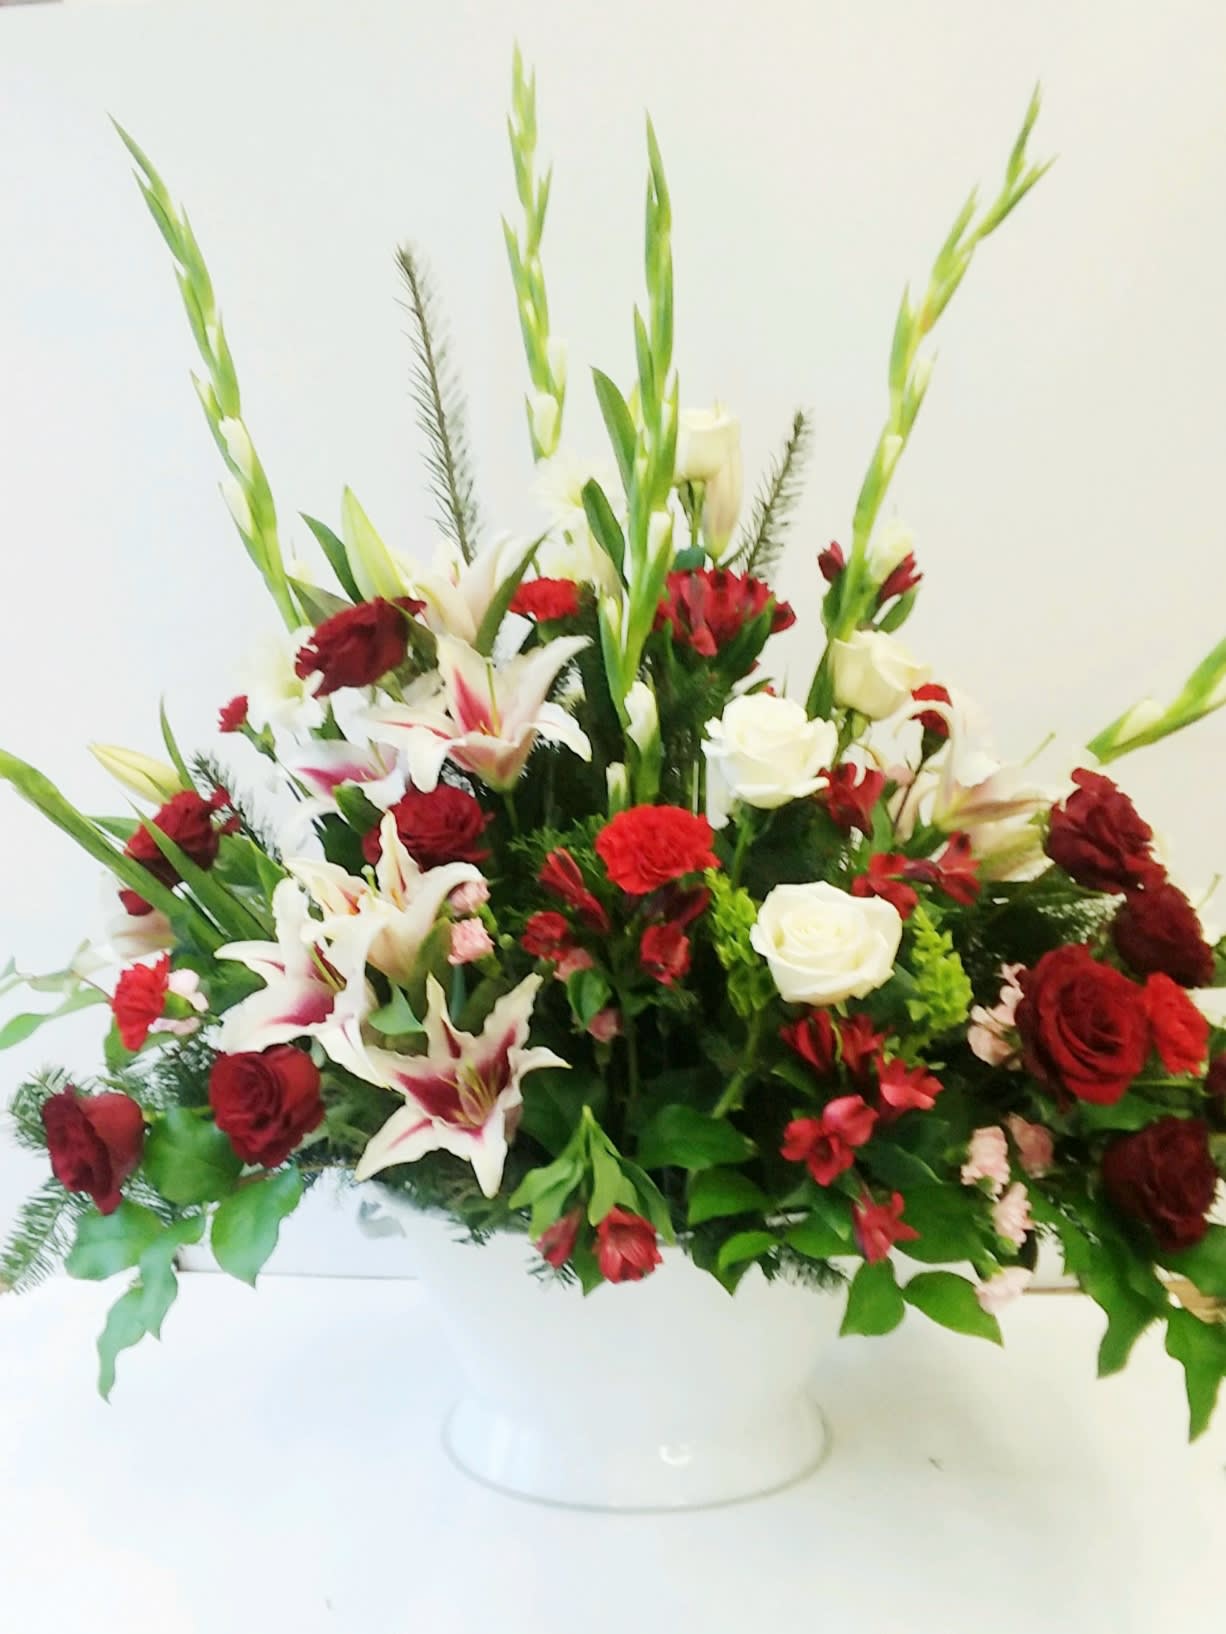 Grand Gesture - When you really want to make a grand gesture! A beautiful full arrangement filled with red roses, stargazer lilies, gladiolus, carnations and more